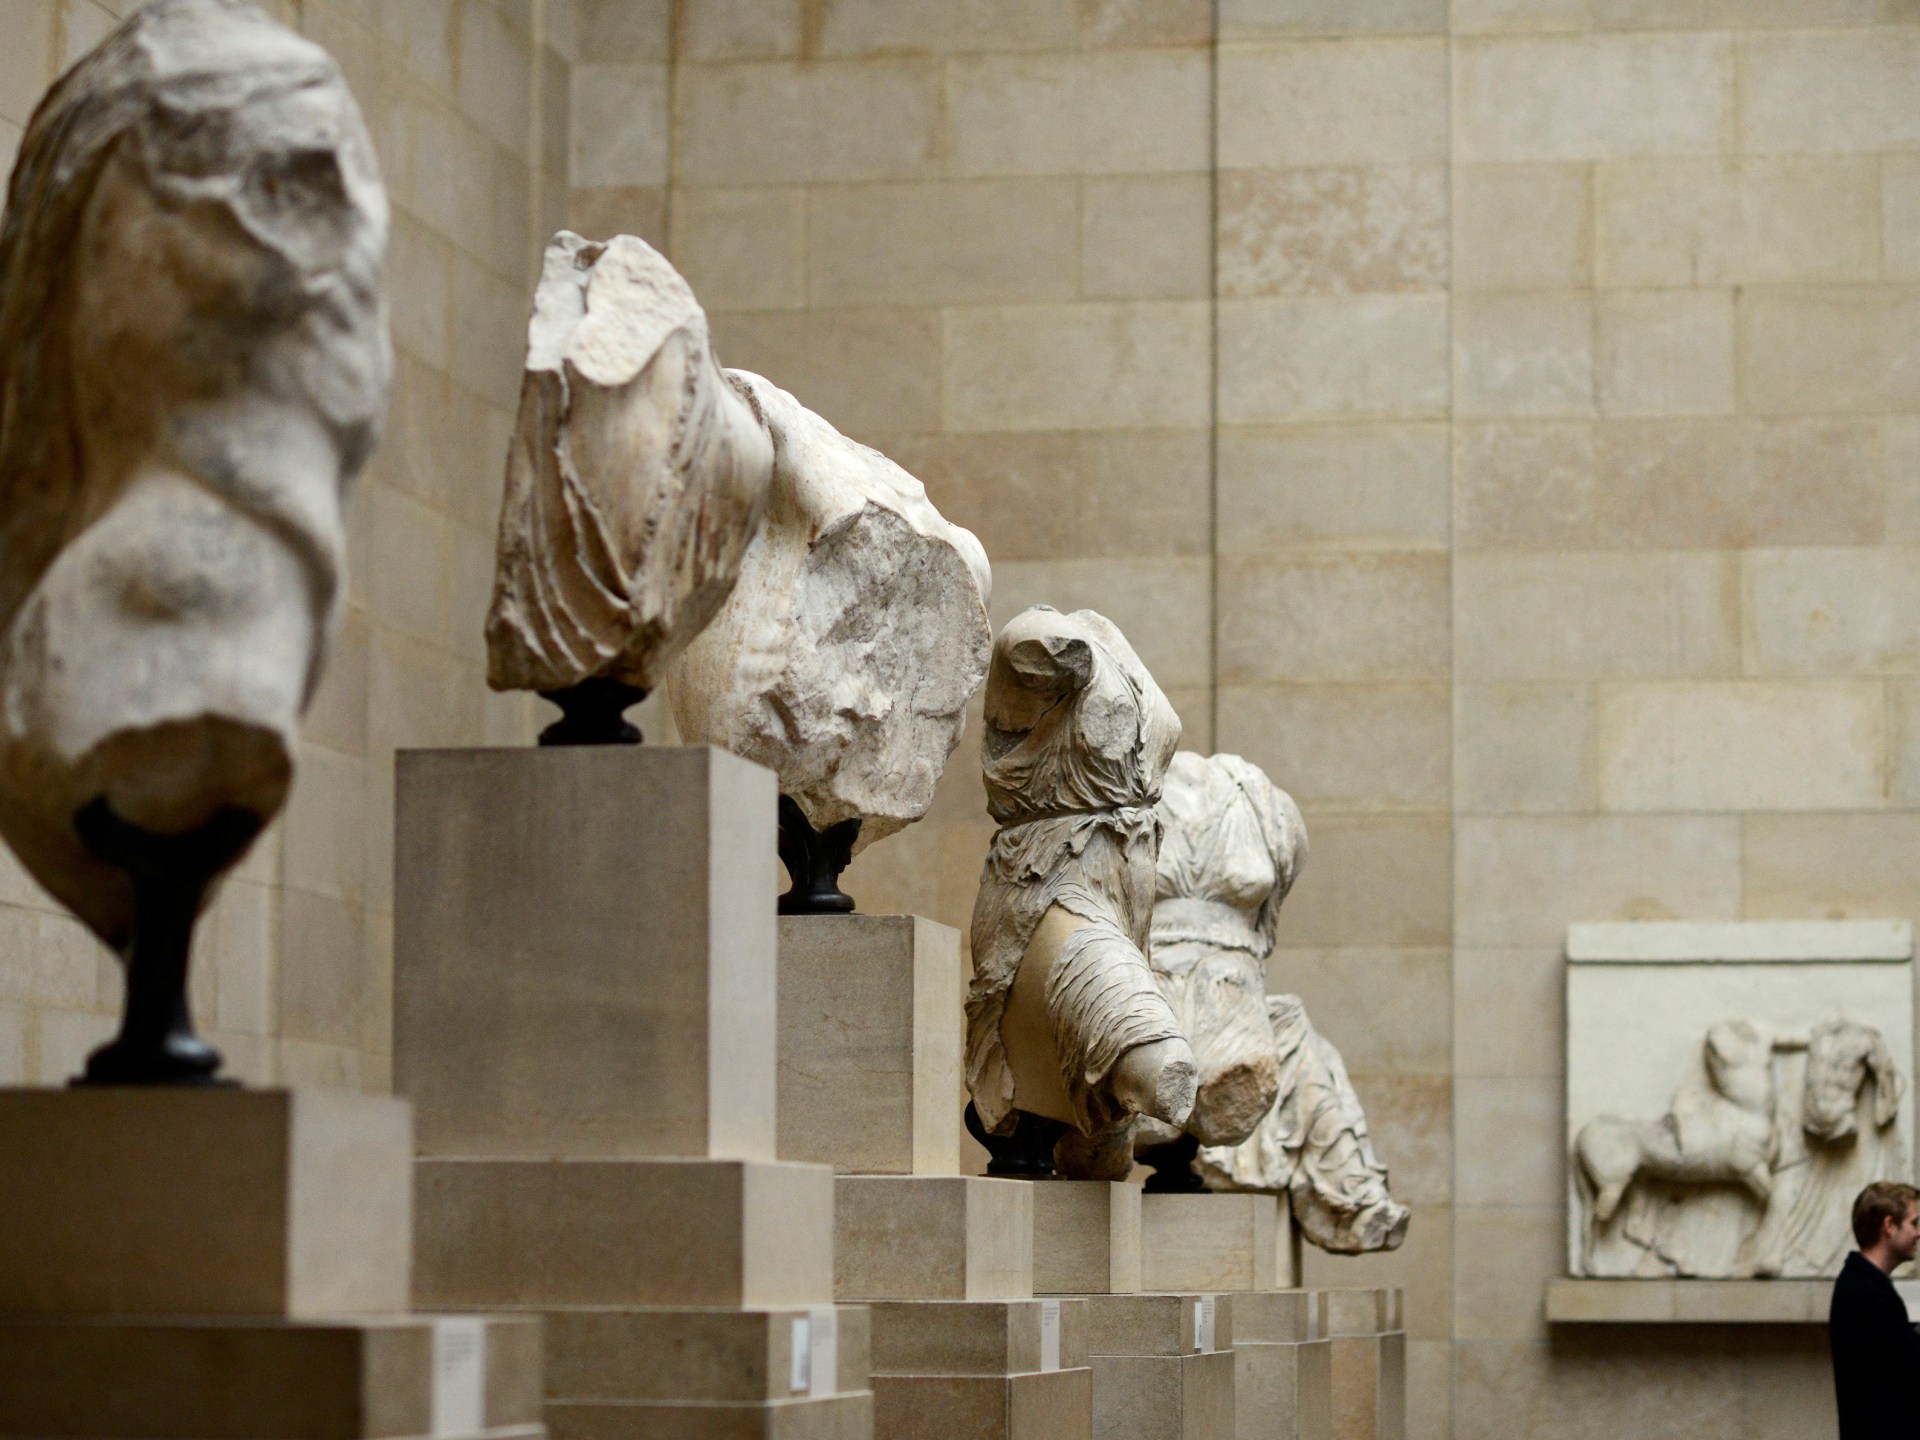 Rumours of Parthenon Marbles’ return ‘overhyped’, experts say